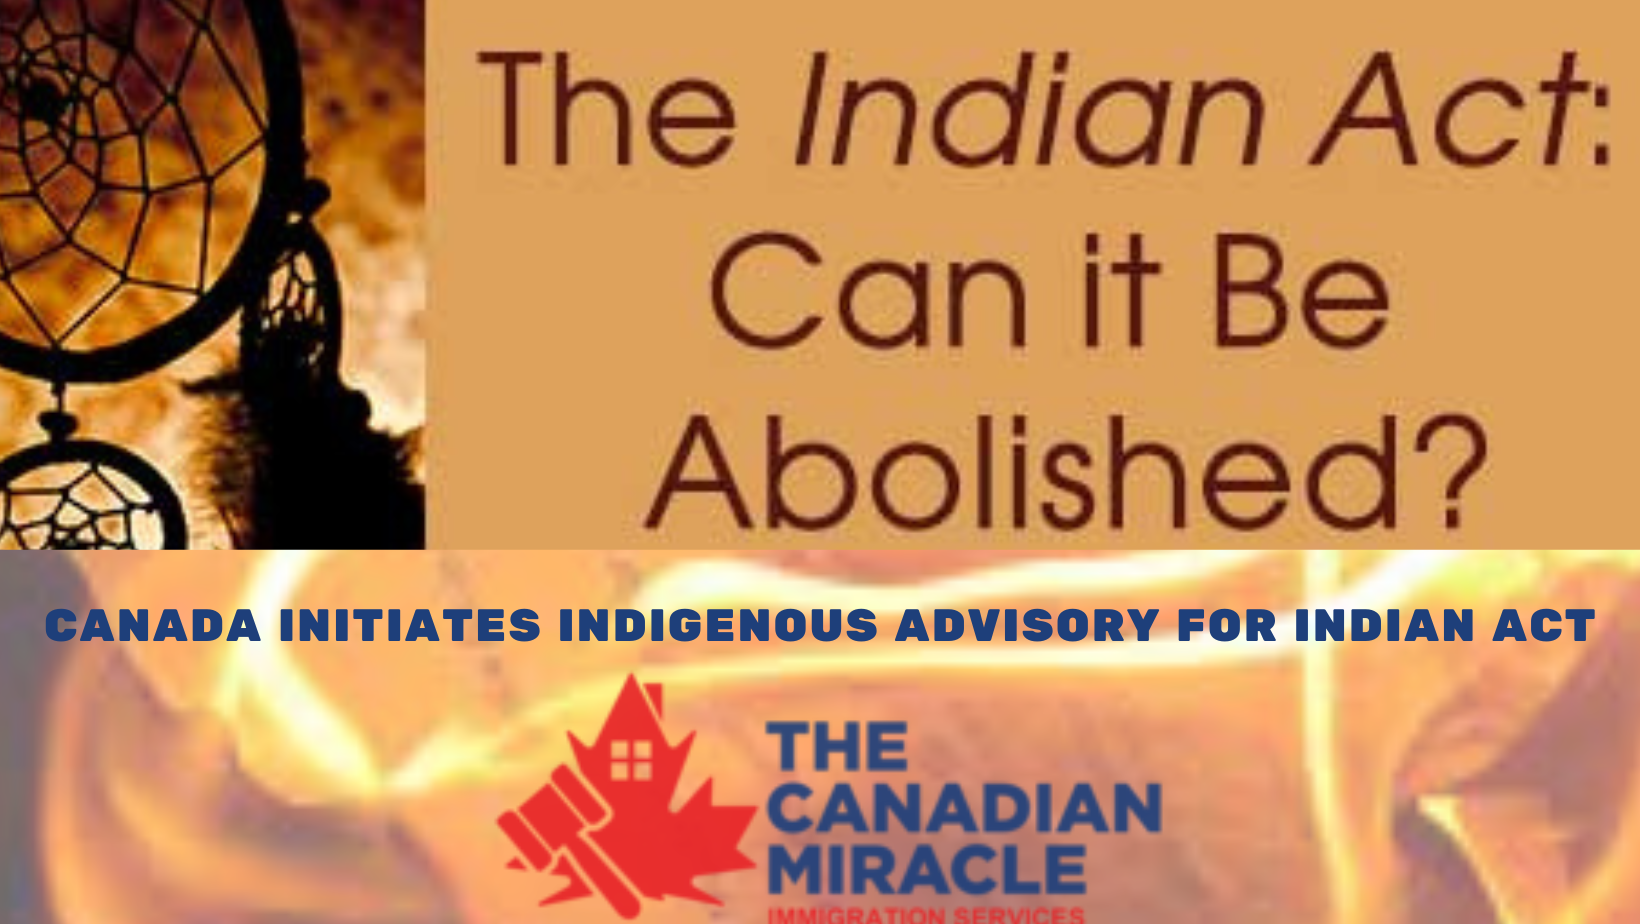 Canada Initiates Indigenous Advisory for Indian Act